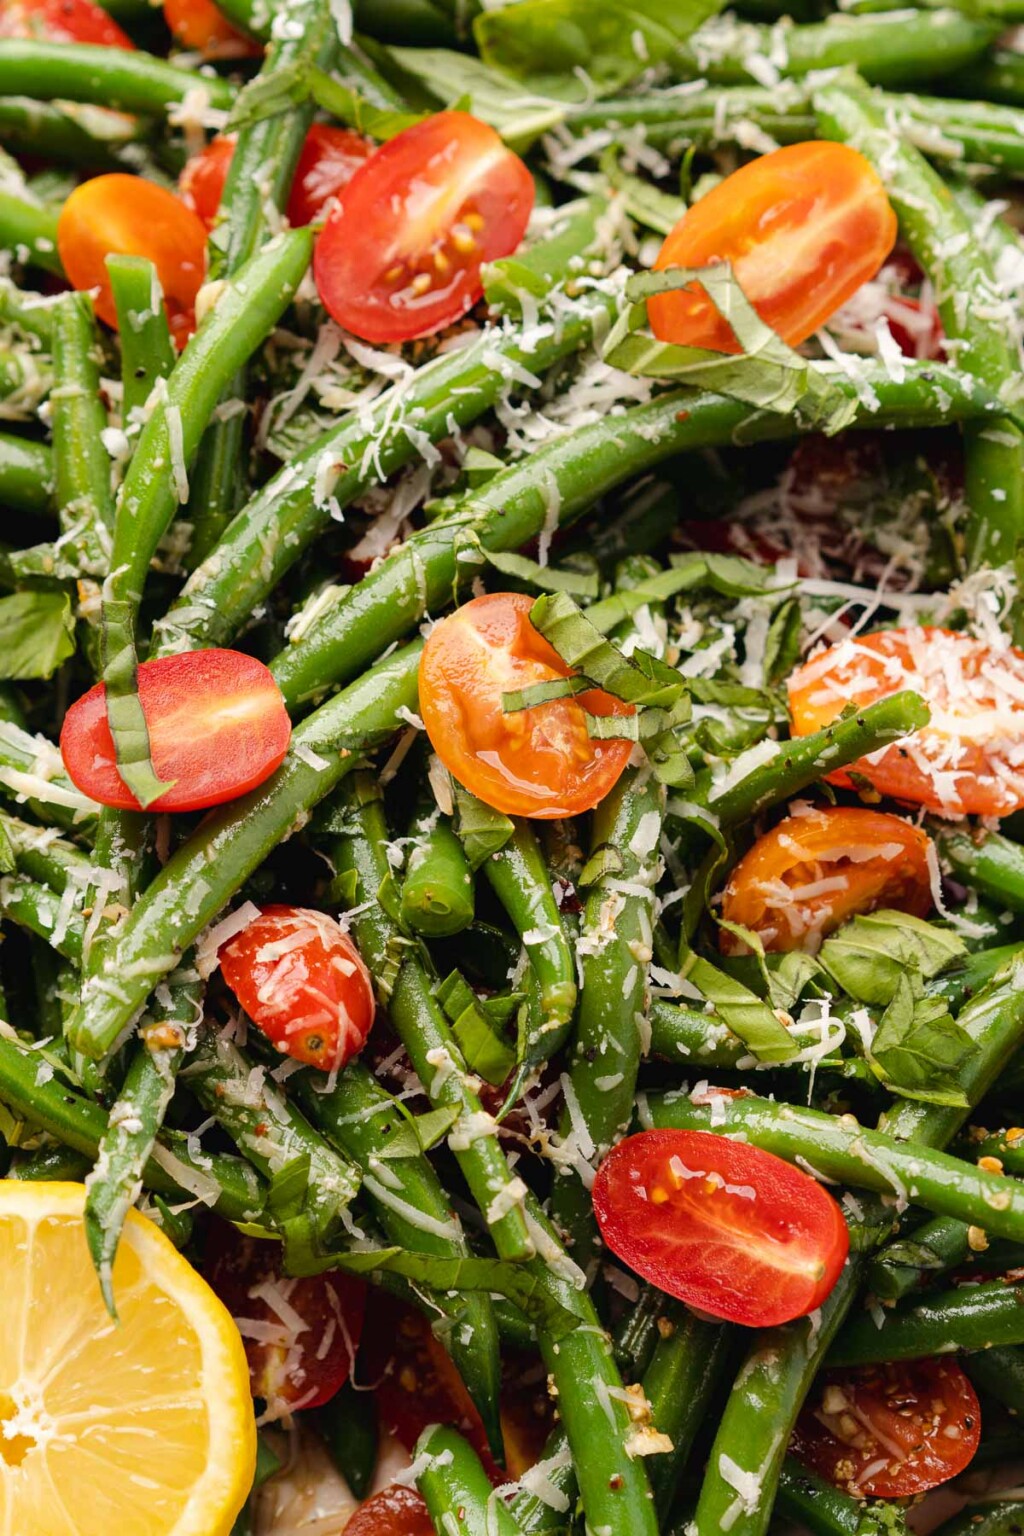 Easy Italian Green Bean Salad with Tomatoes - A Full Living